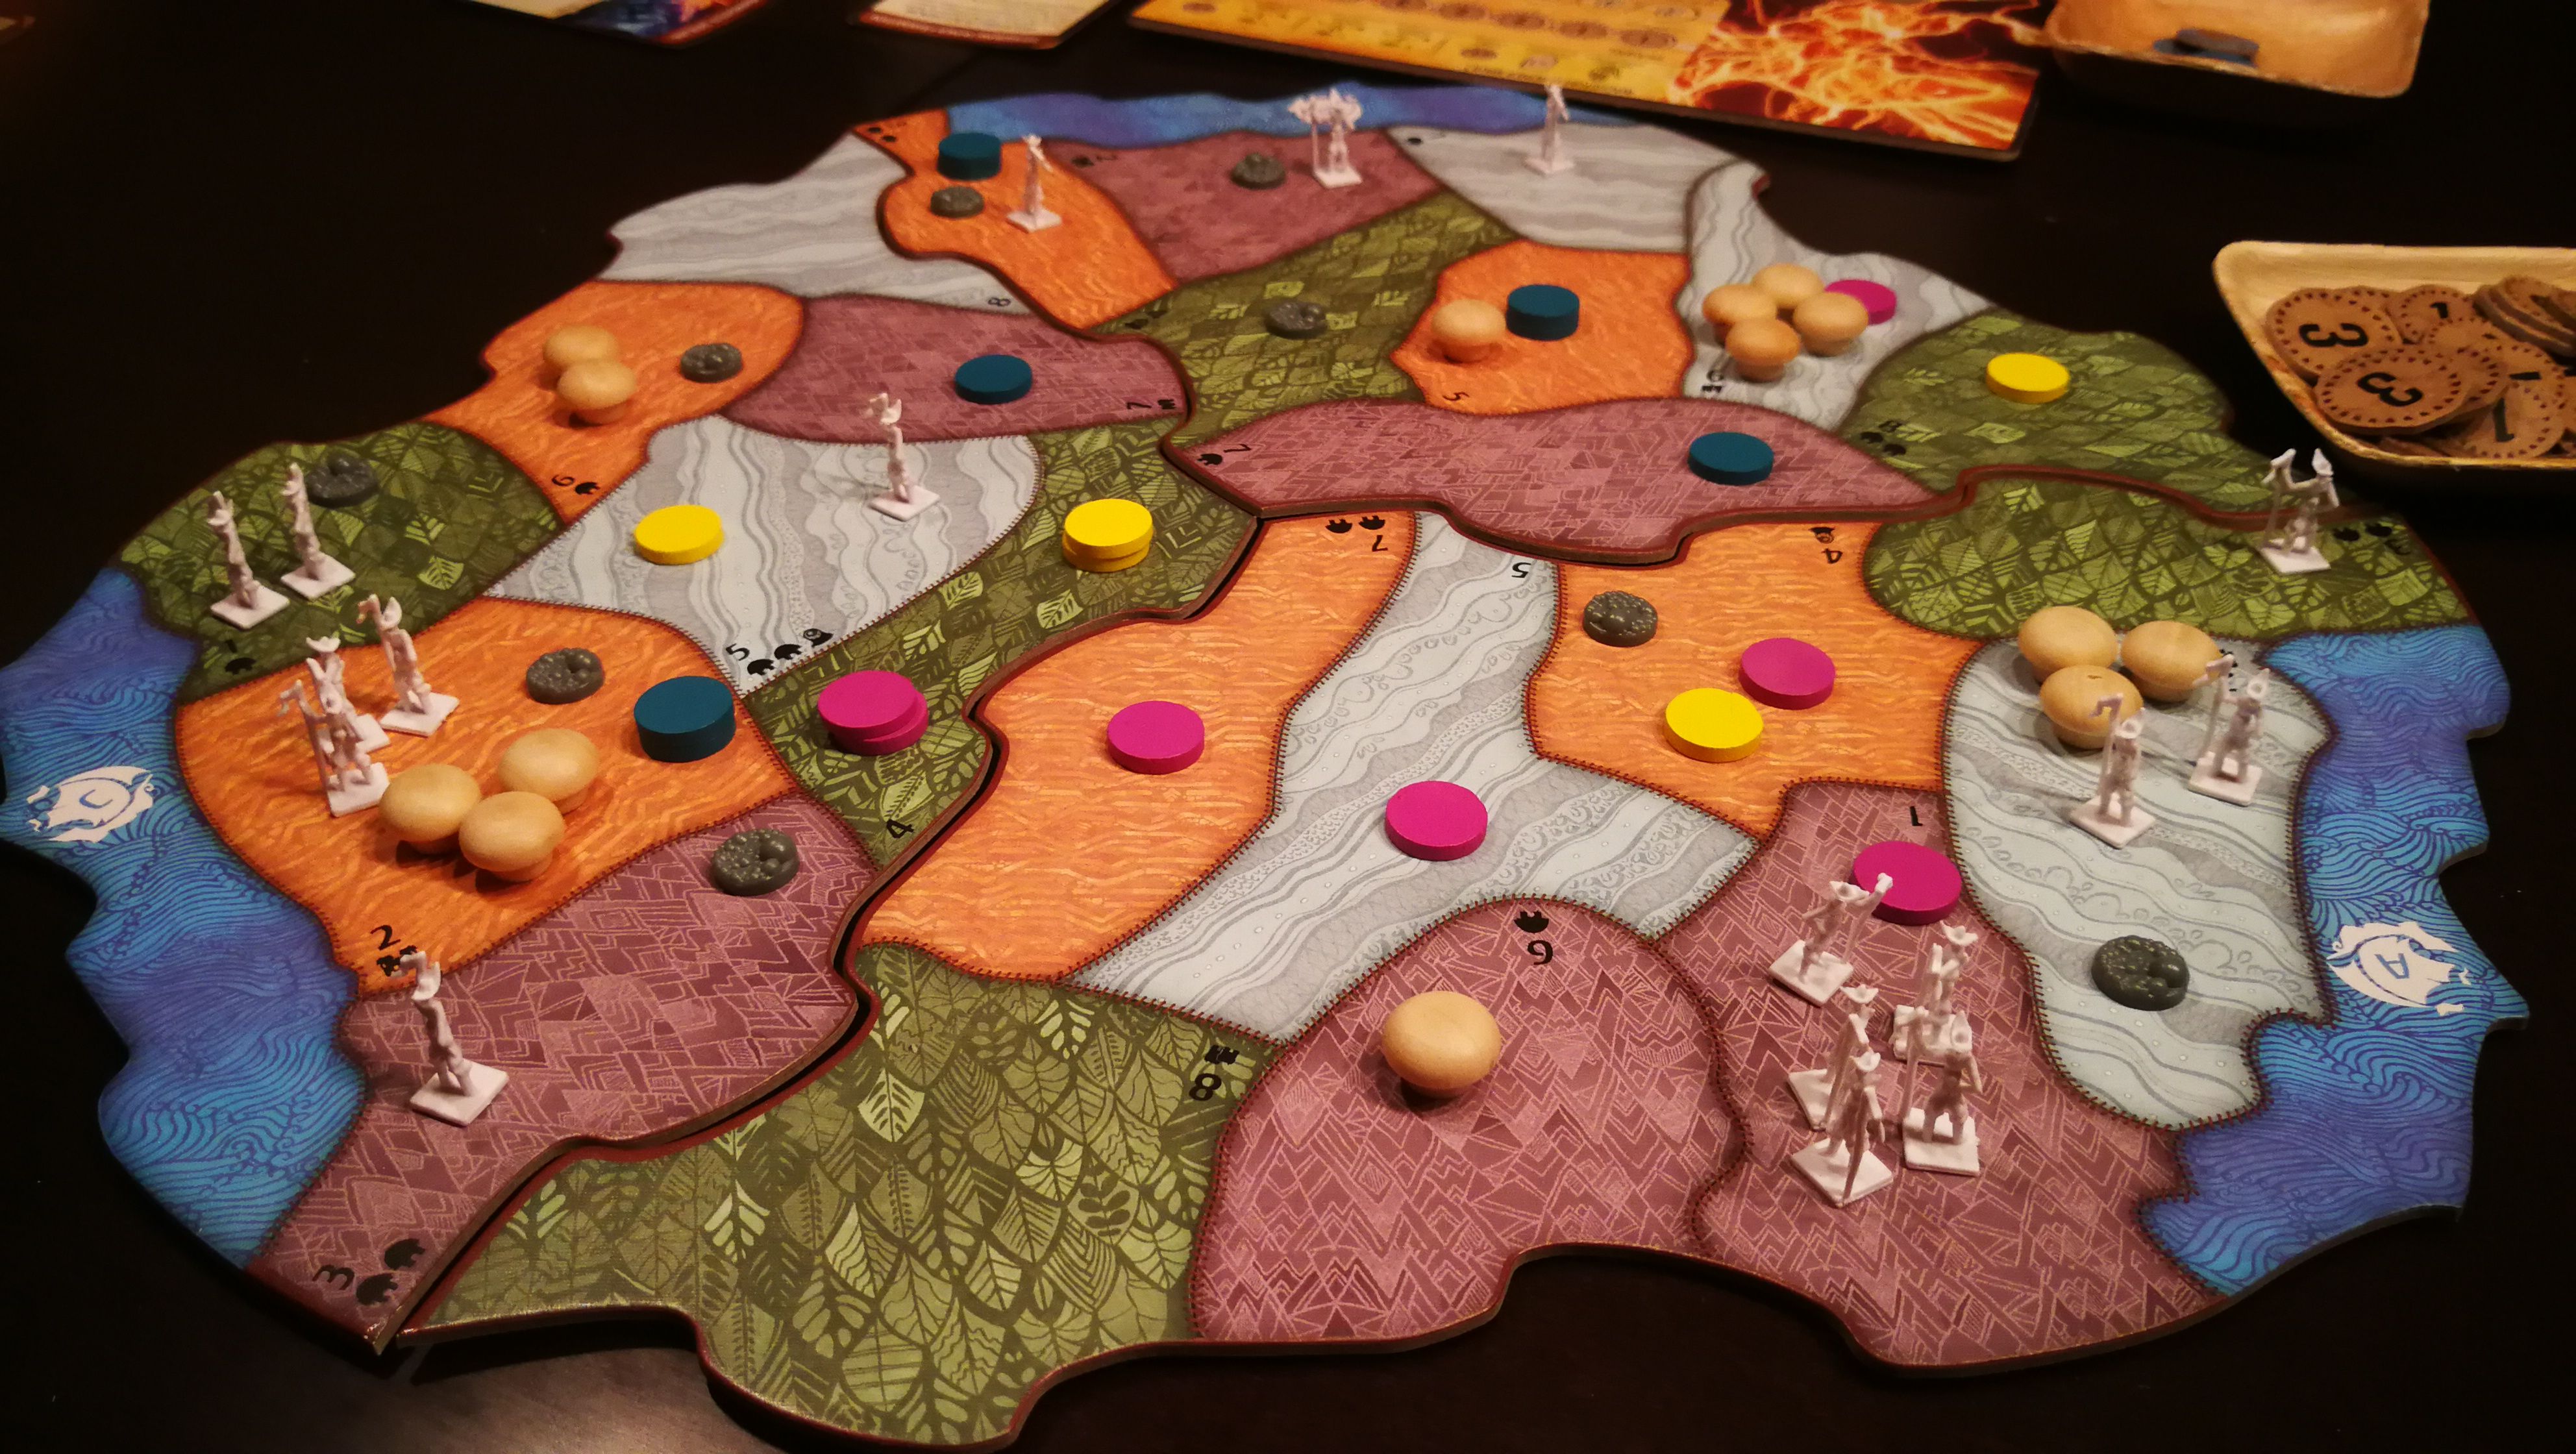 An image of the Spirit Island board game, which includes landmasses and pieces of various vibrant colors.